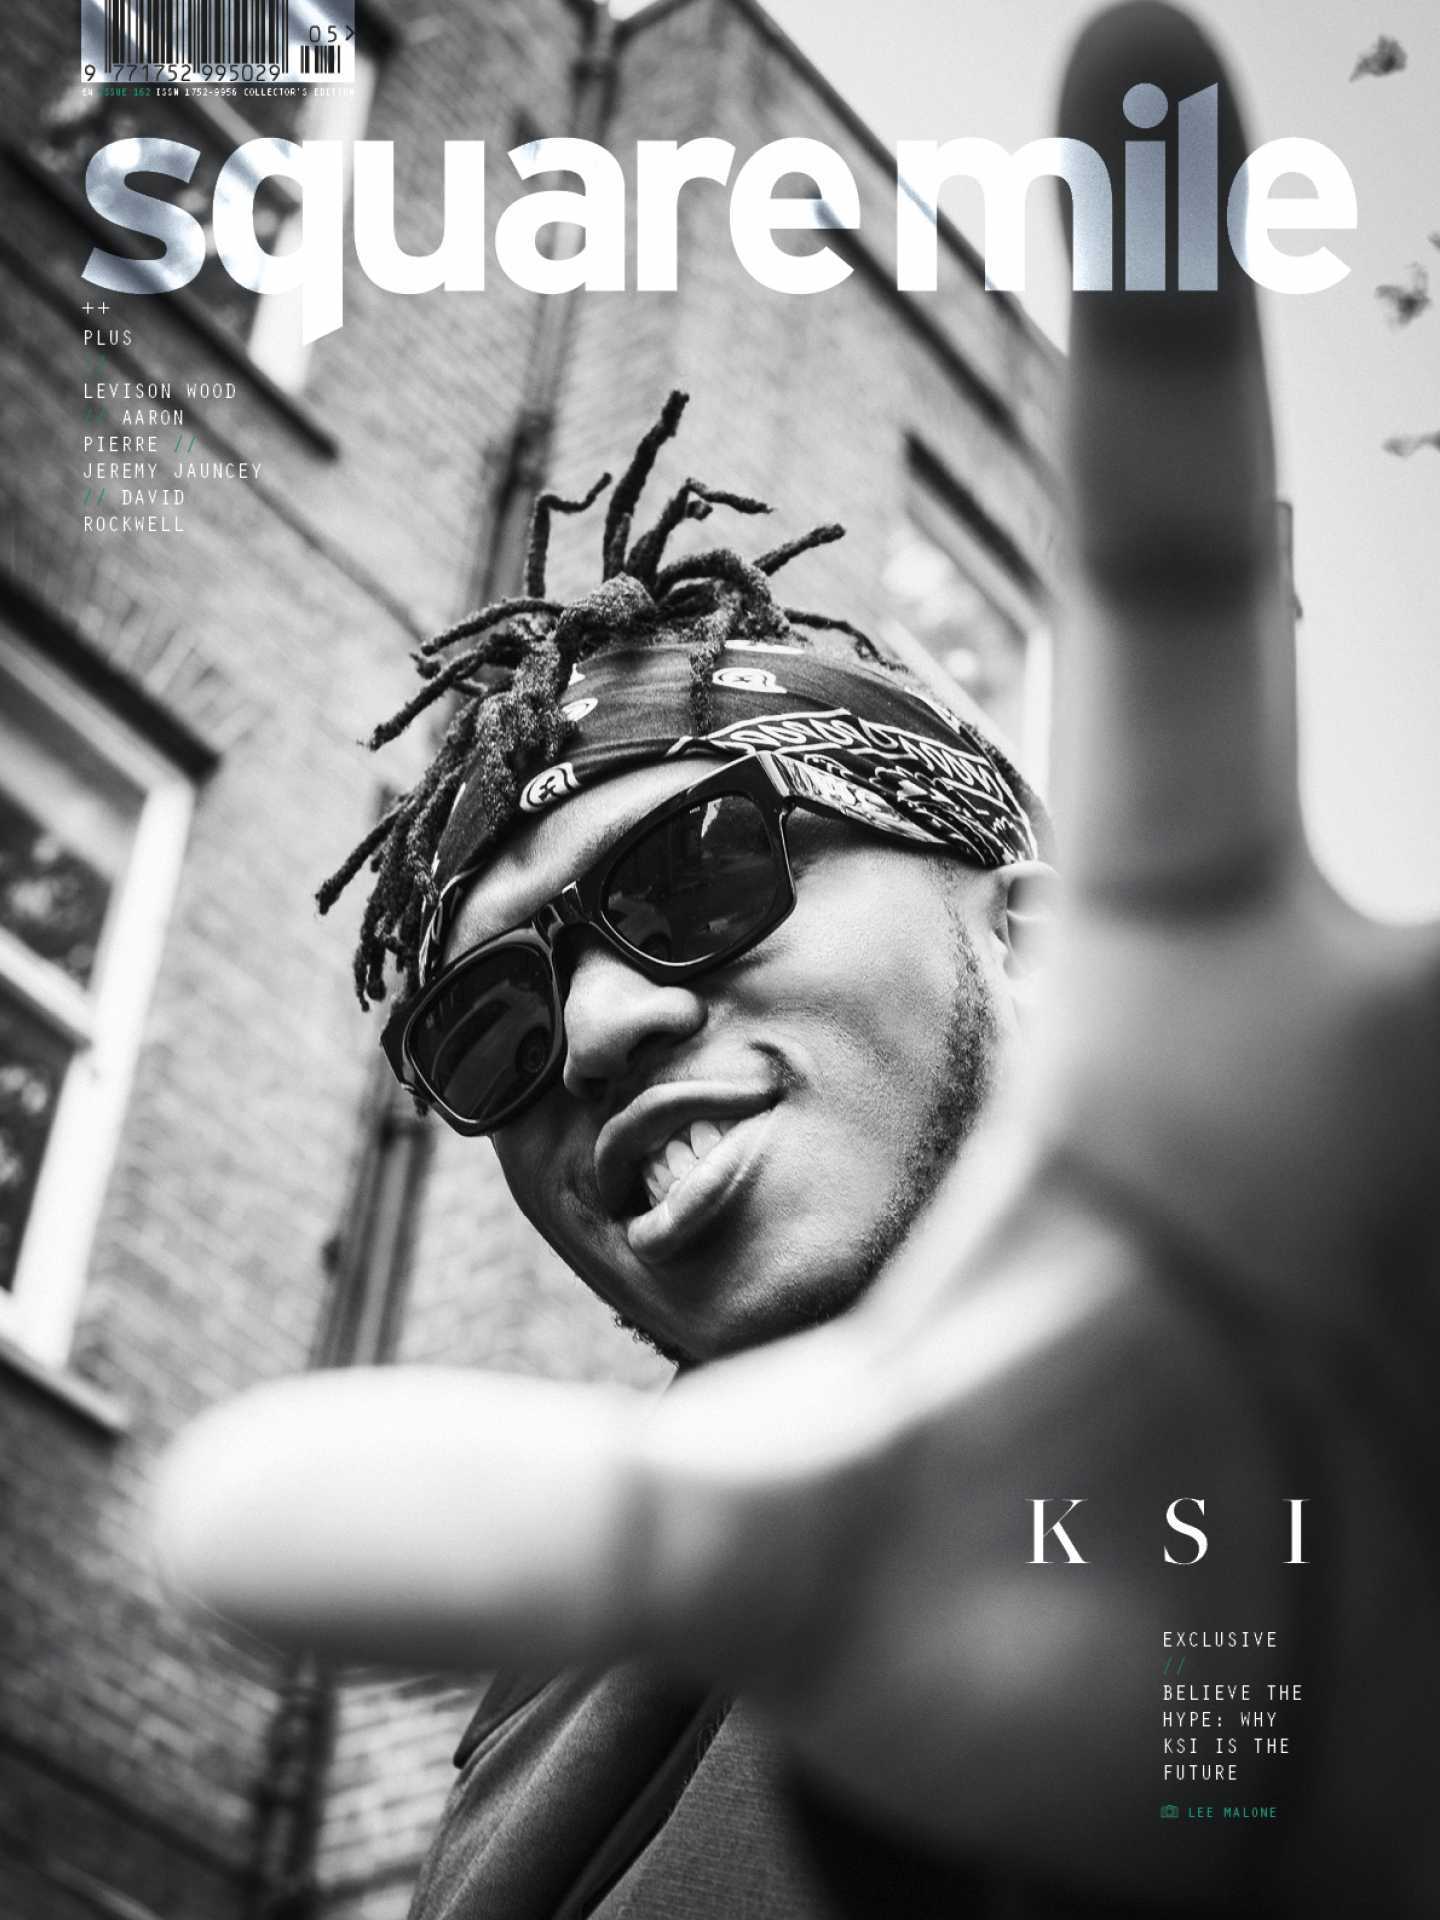 KSI photographed for Square Mile by Lee Malone